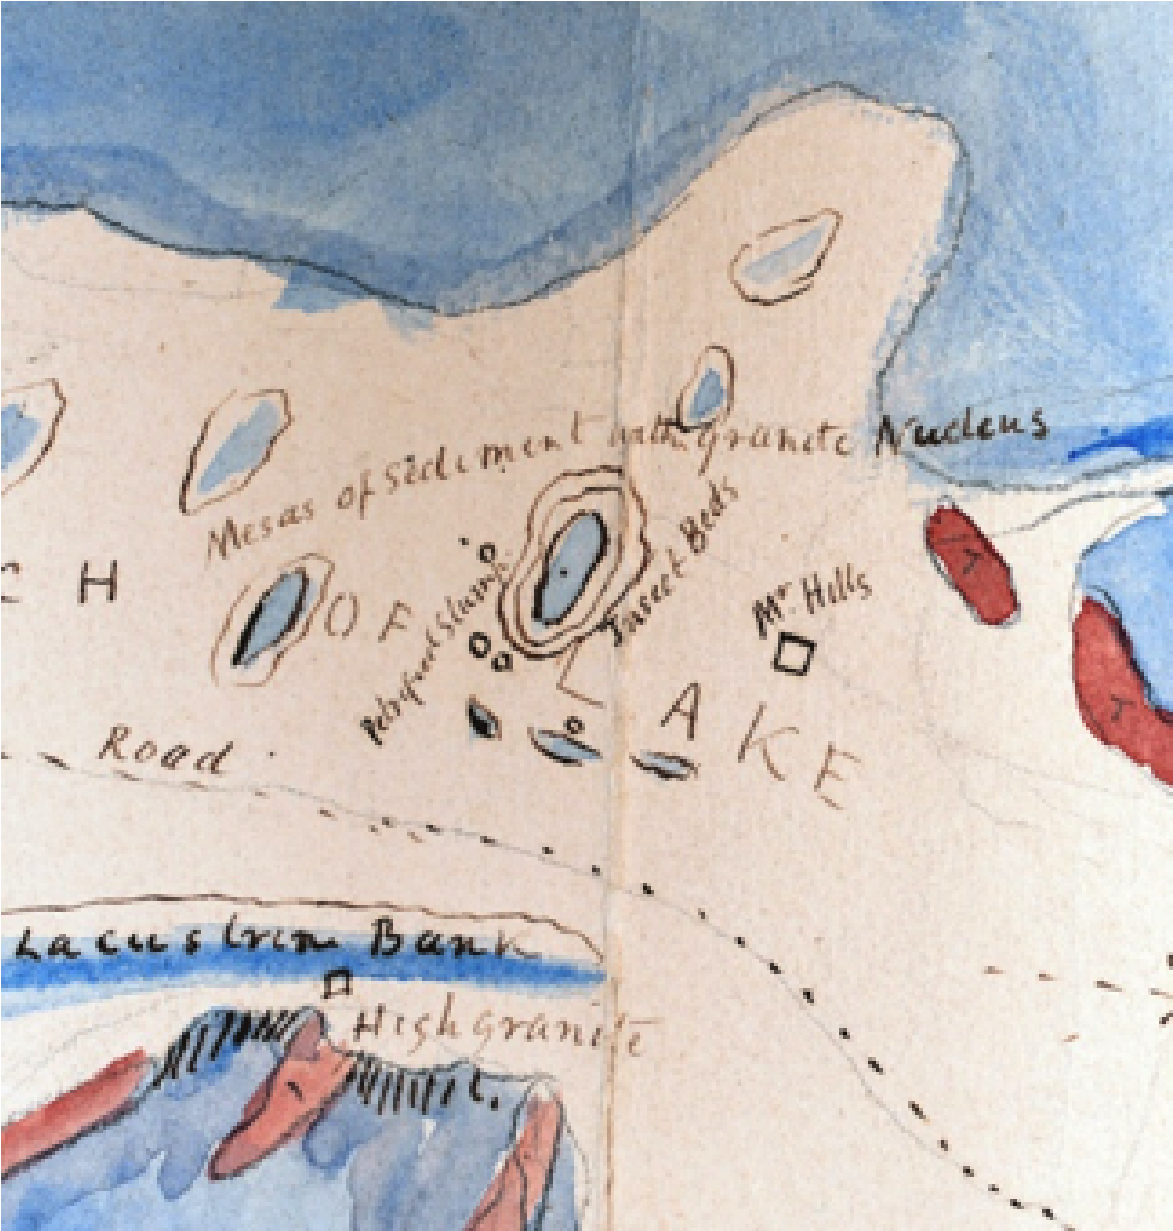 A closeup of a watercolor map showing the location of the Hill's homestead in the center.